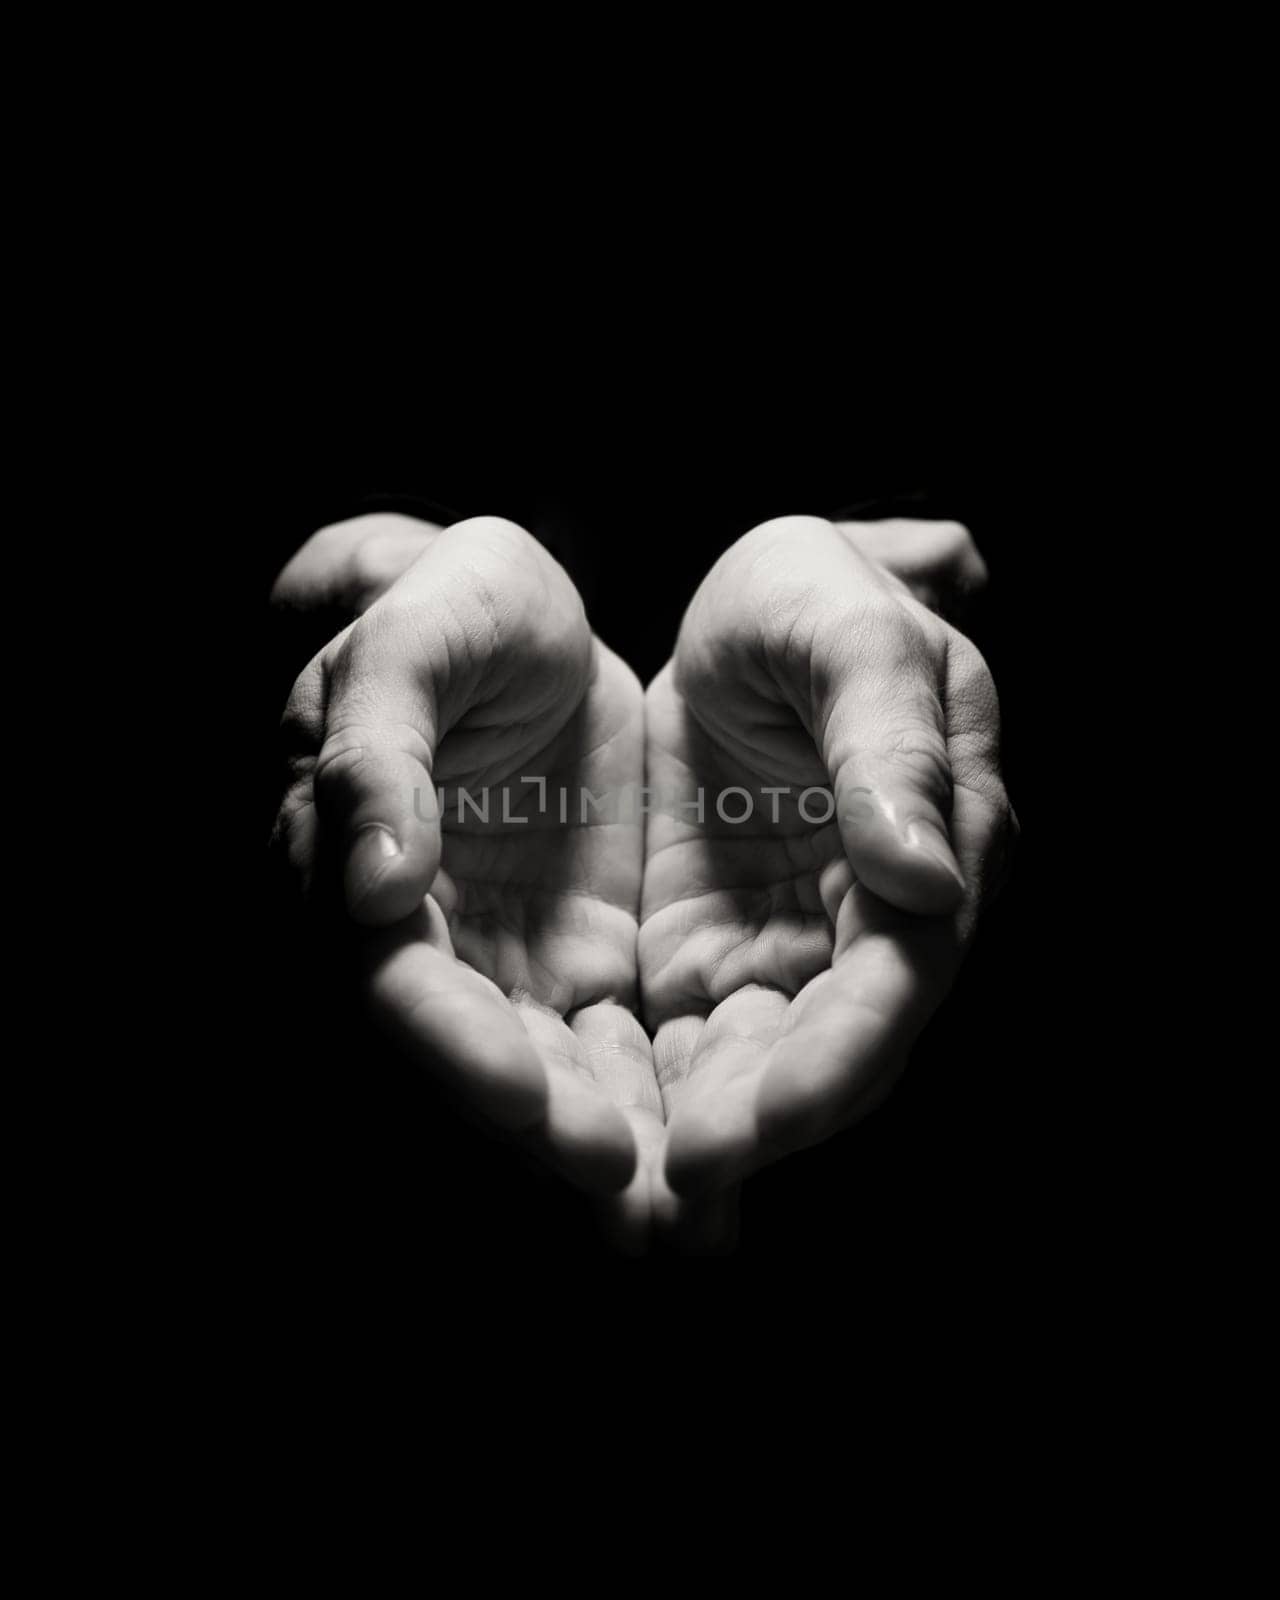 Human hands open in a gesture of giving, presented in stark black and white contrast by apavlin